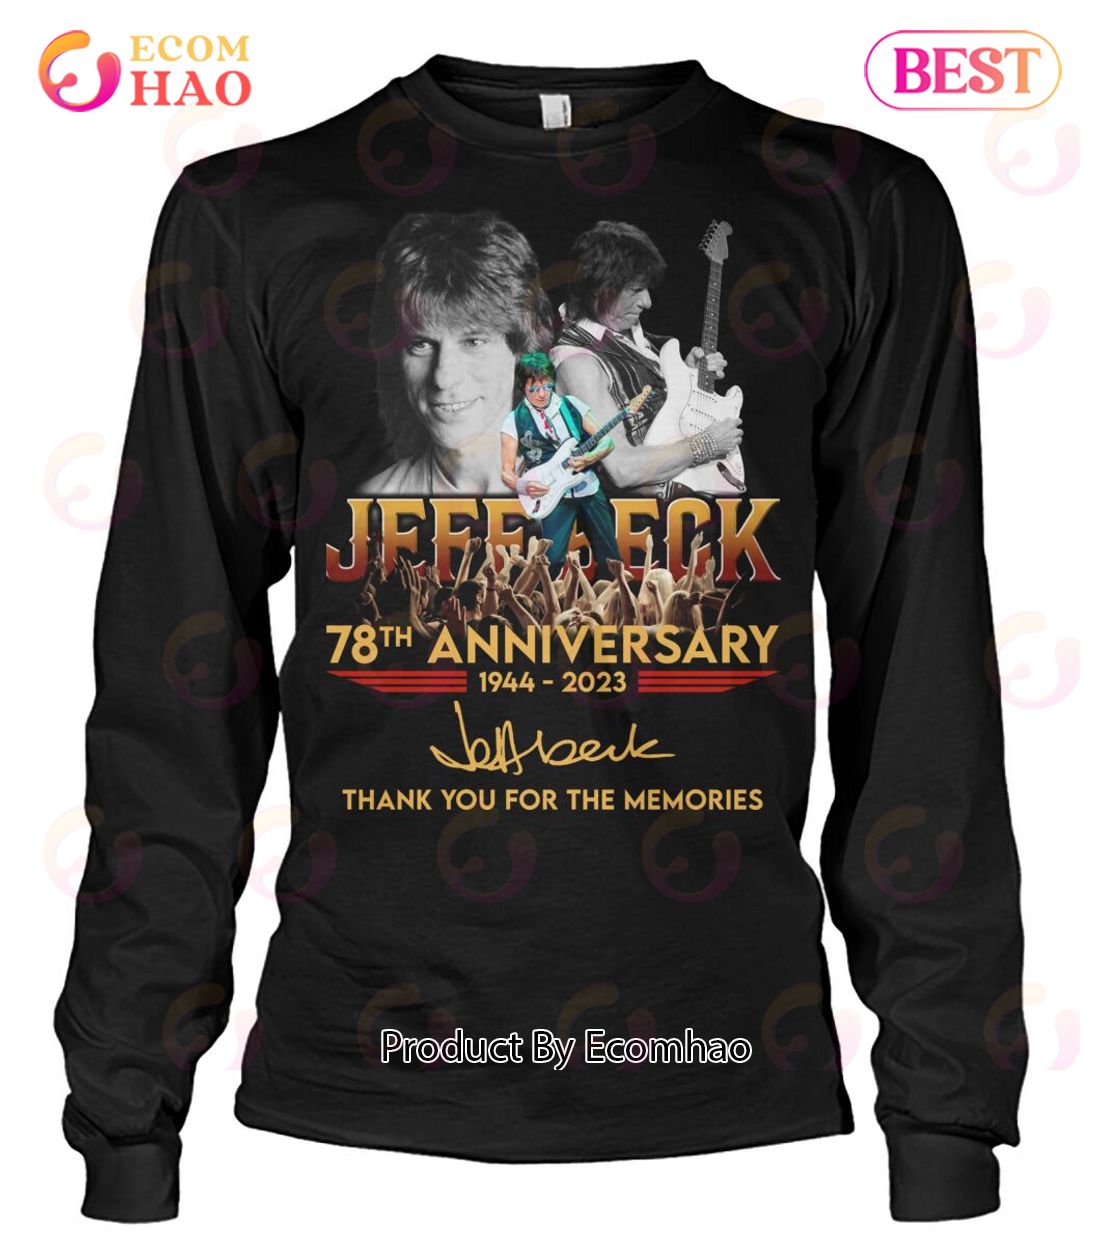 Jeff Beck 78th Anniversary 1944 - 2023 Thank You For The Memories T-Shirt